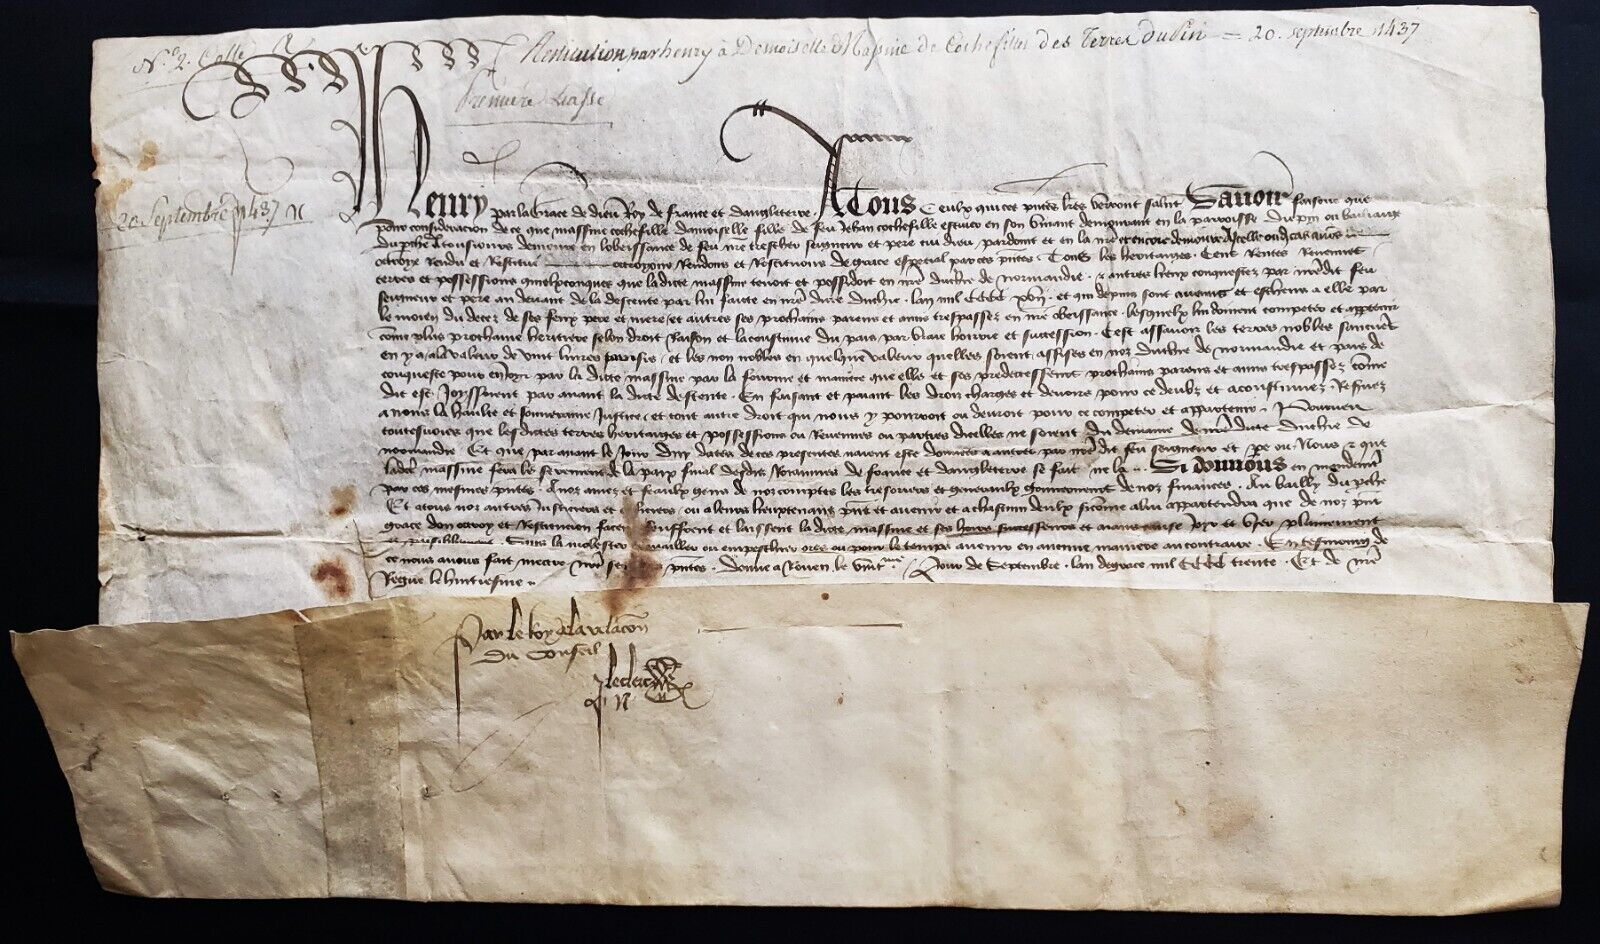 KING OF FRANCE & ENGLAND HENRY VI - Charter for the Restitution of Property 1437